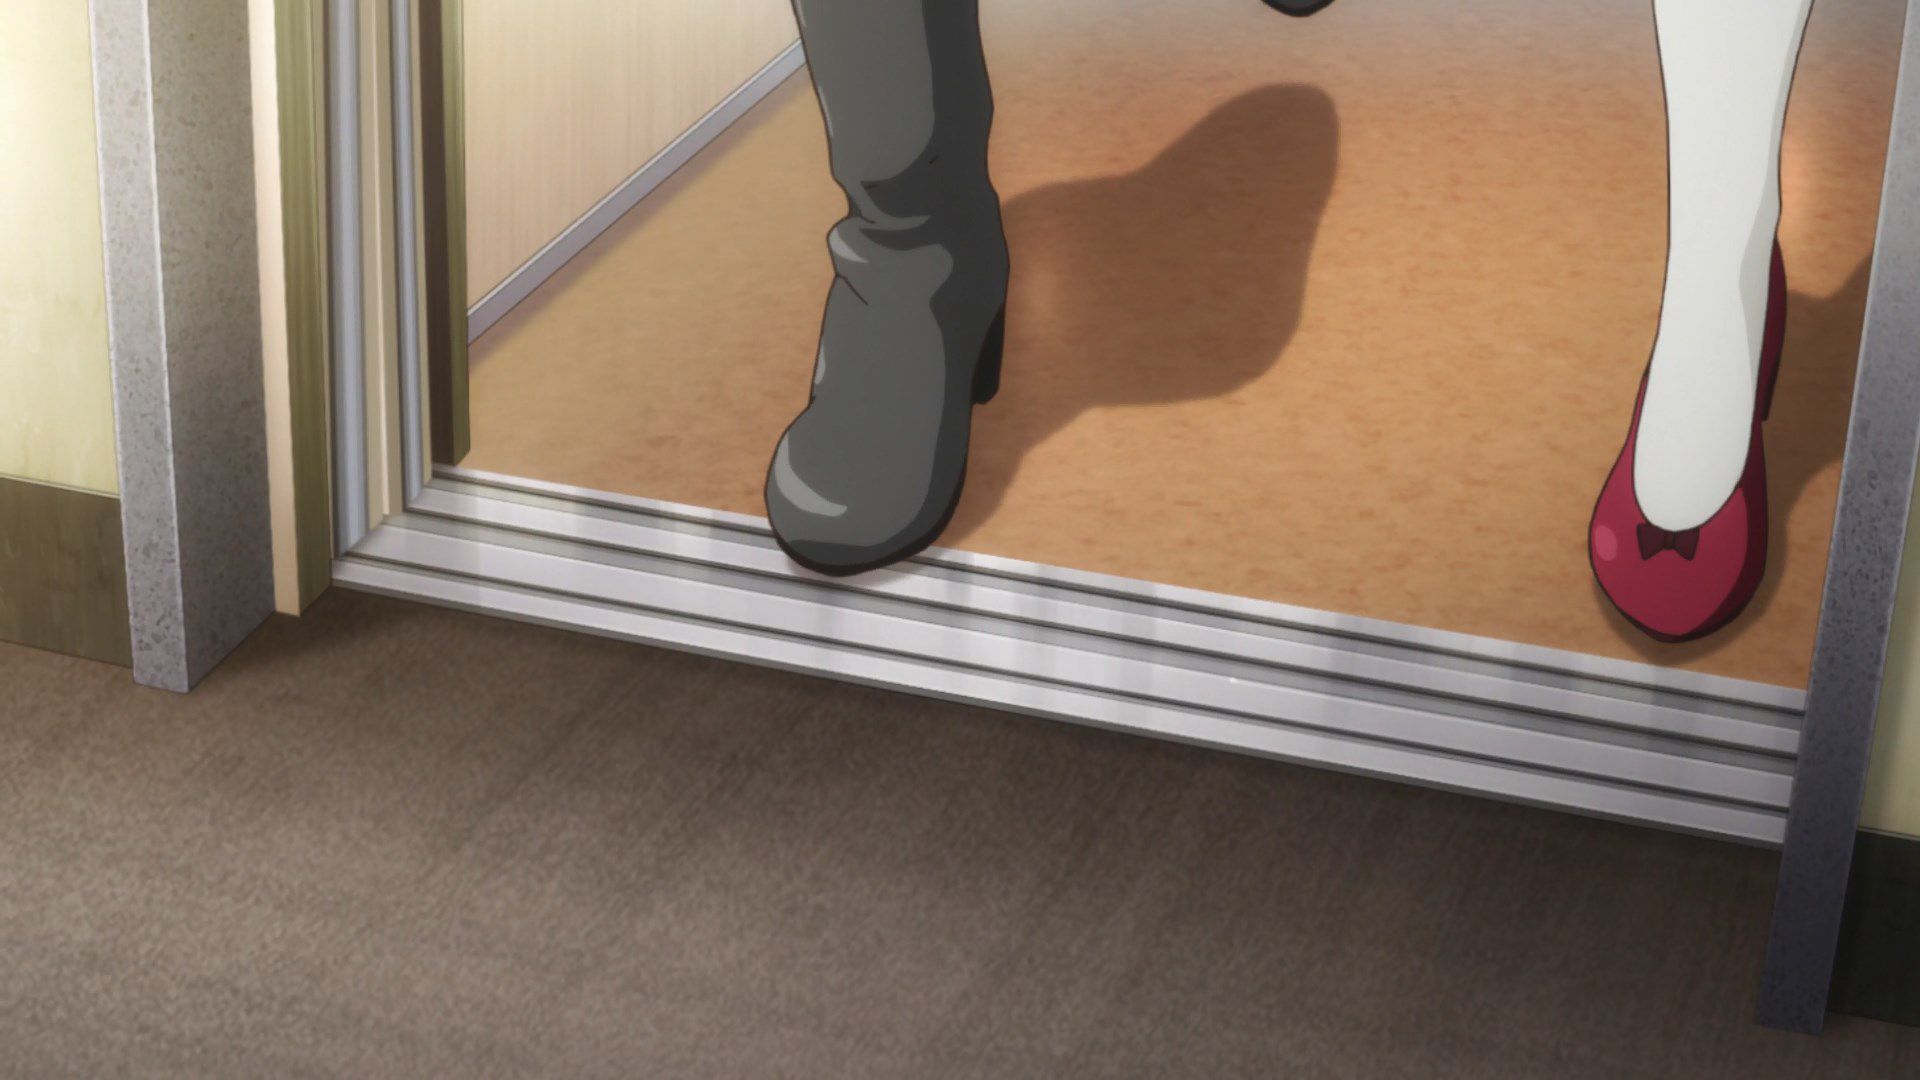 [God images] "love live! ' Μm ' PV's leg is too erotic everyone wakes up to a leg fetish of wwwww 89